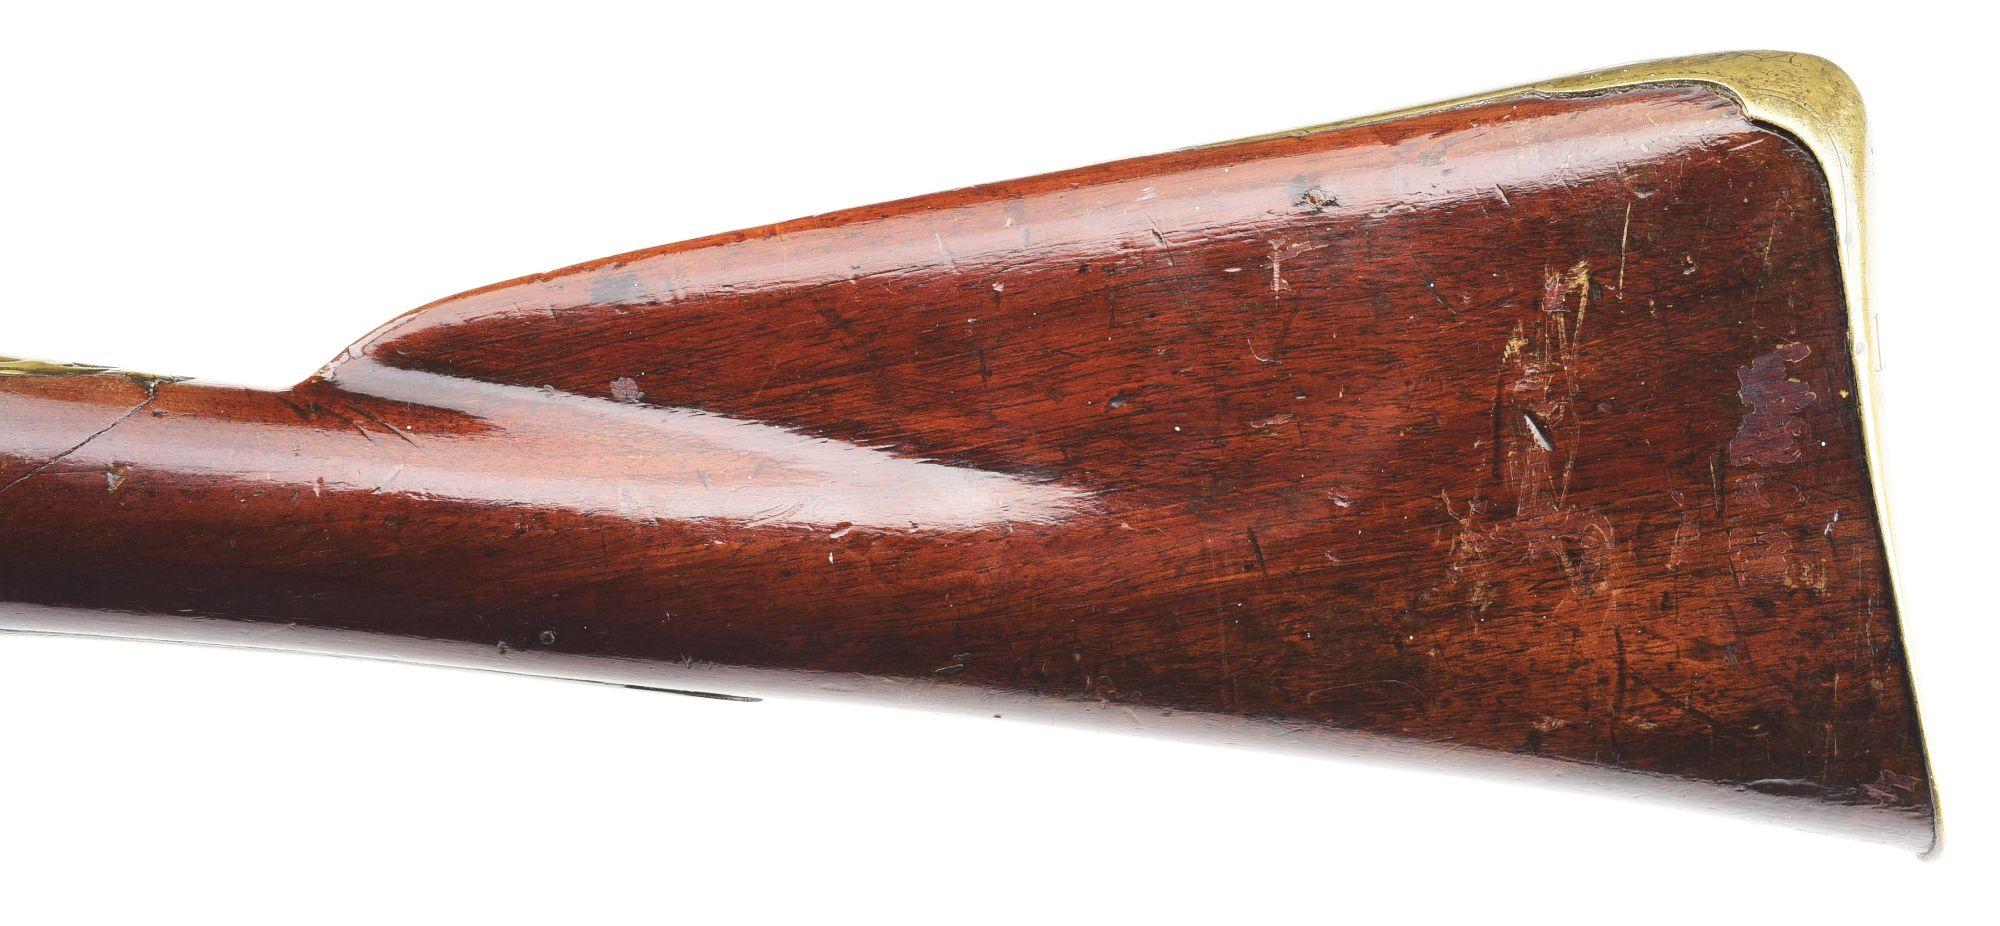 (A) EXTREMELY RARE PATTERN 1756 ROYAL ARTILLERY OFFICER'S FUSIL OF LT. JOSEPH CHENEY